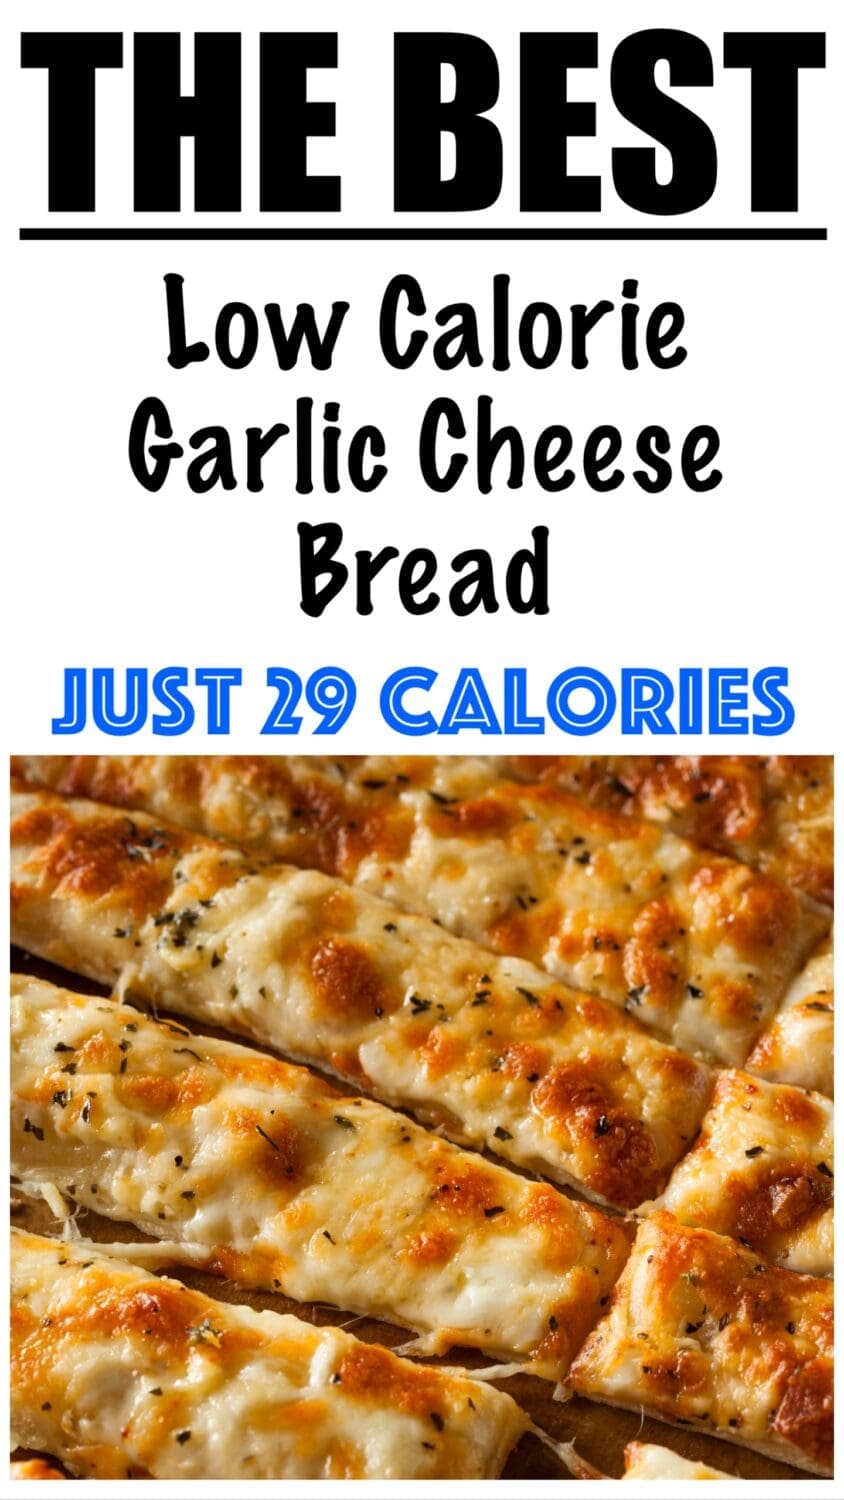 Low Calorie Garlic Cheese Bread